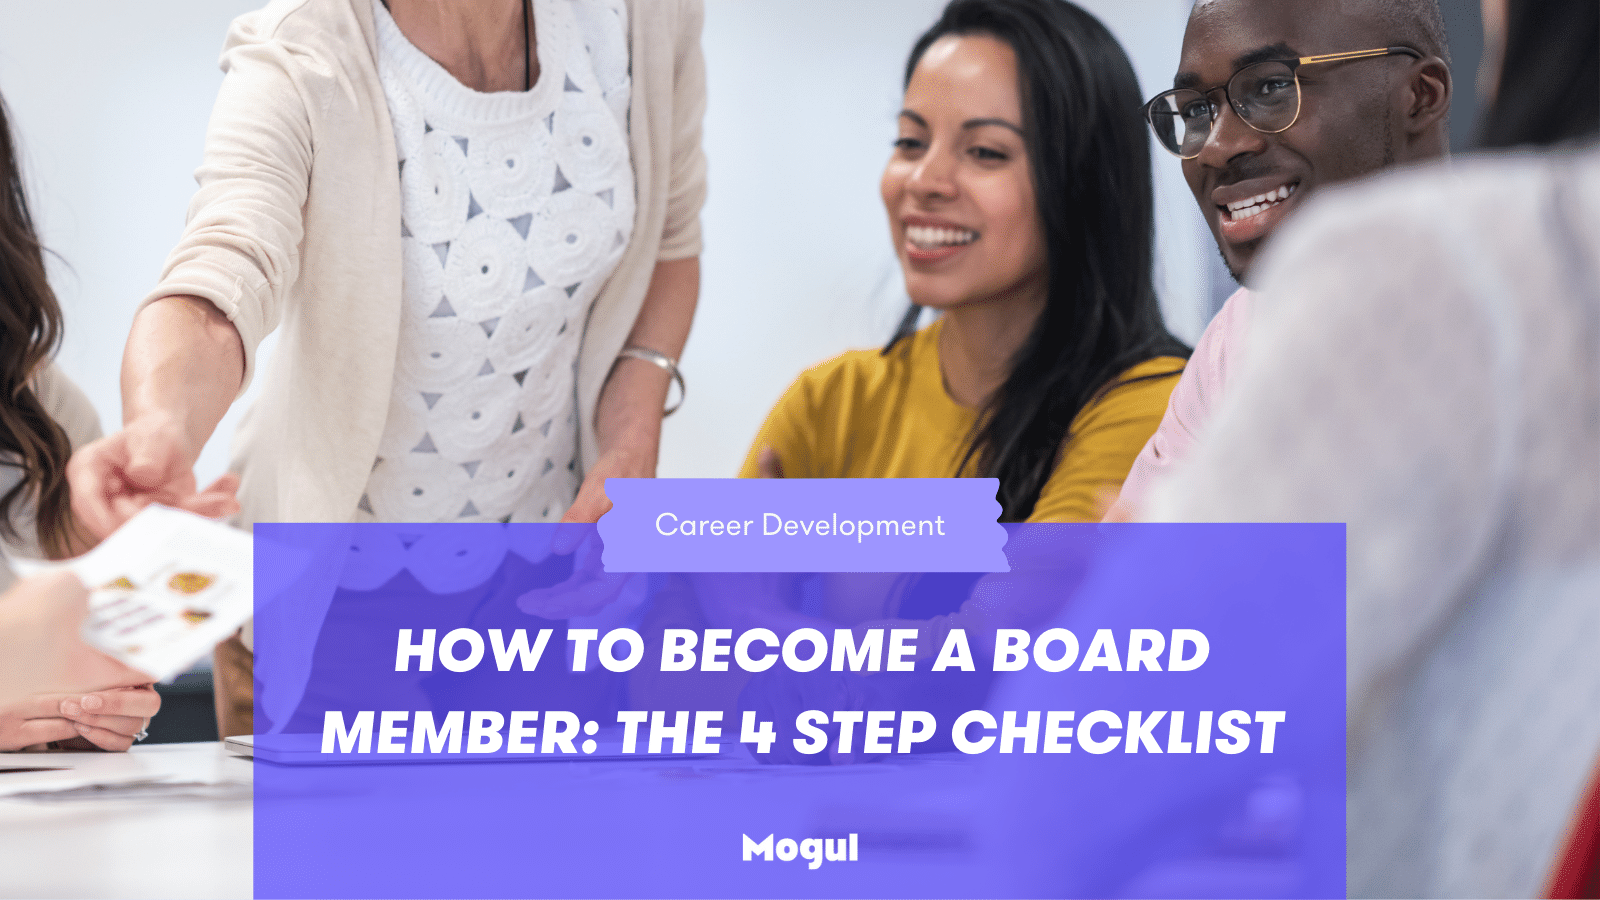 How to become a board member: the 4 step checklist